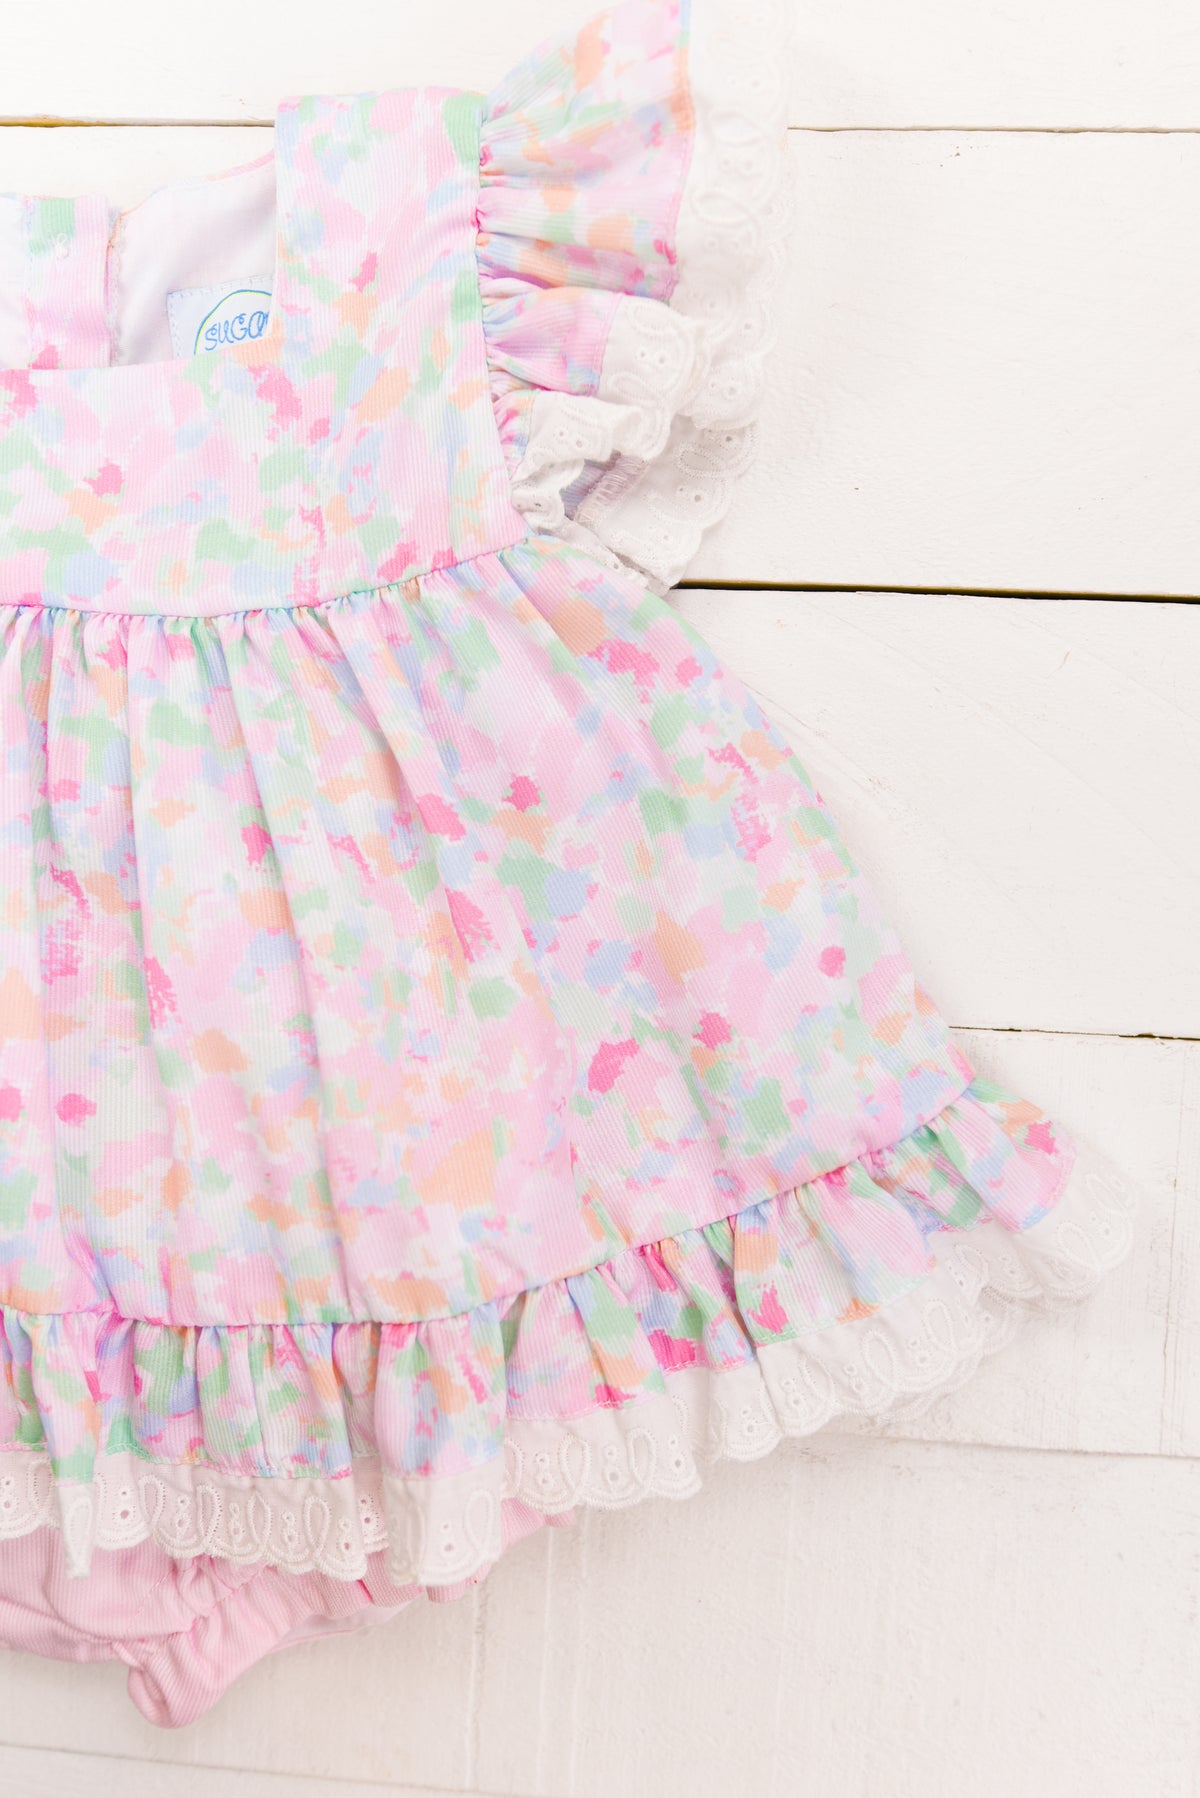 a baby girl's dress and diaper on a white background